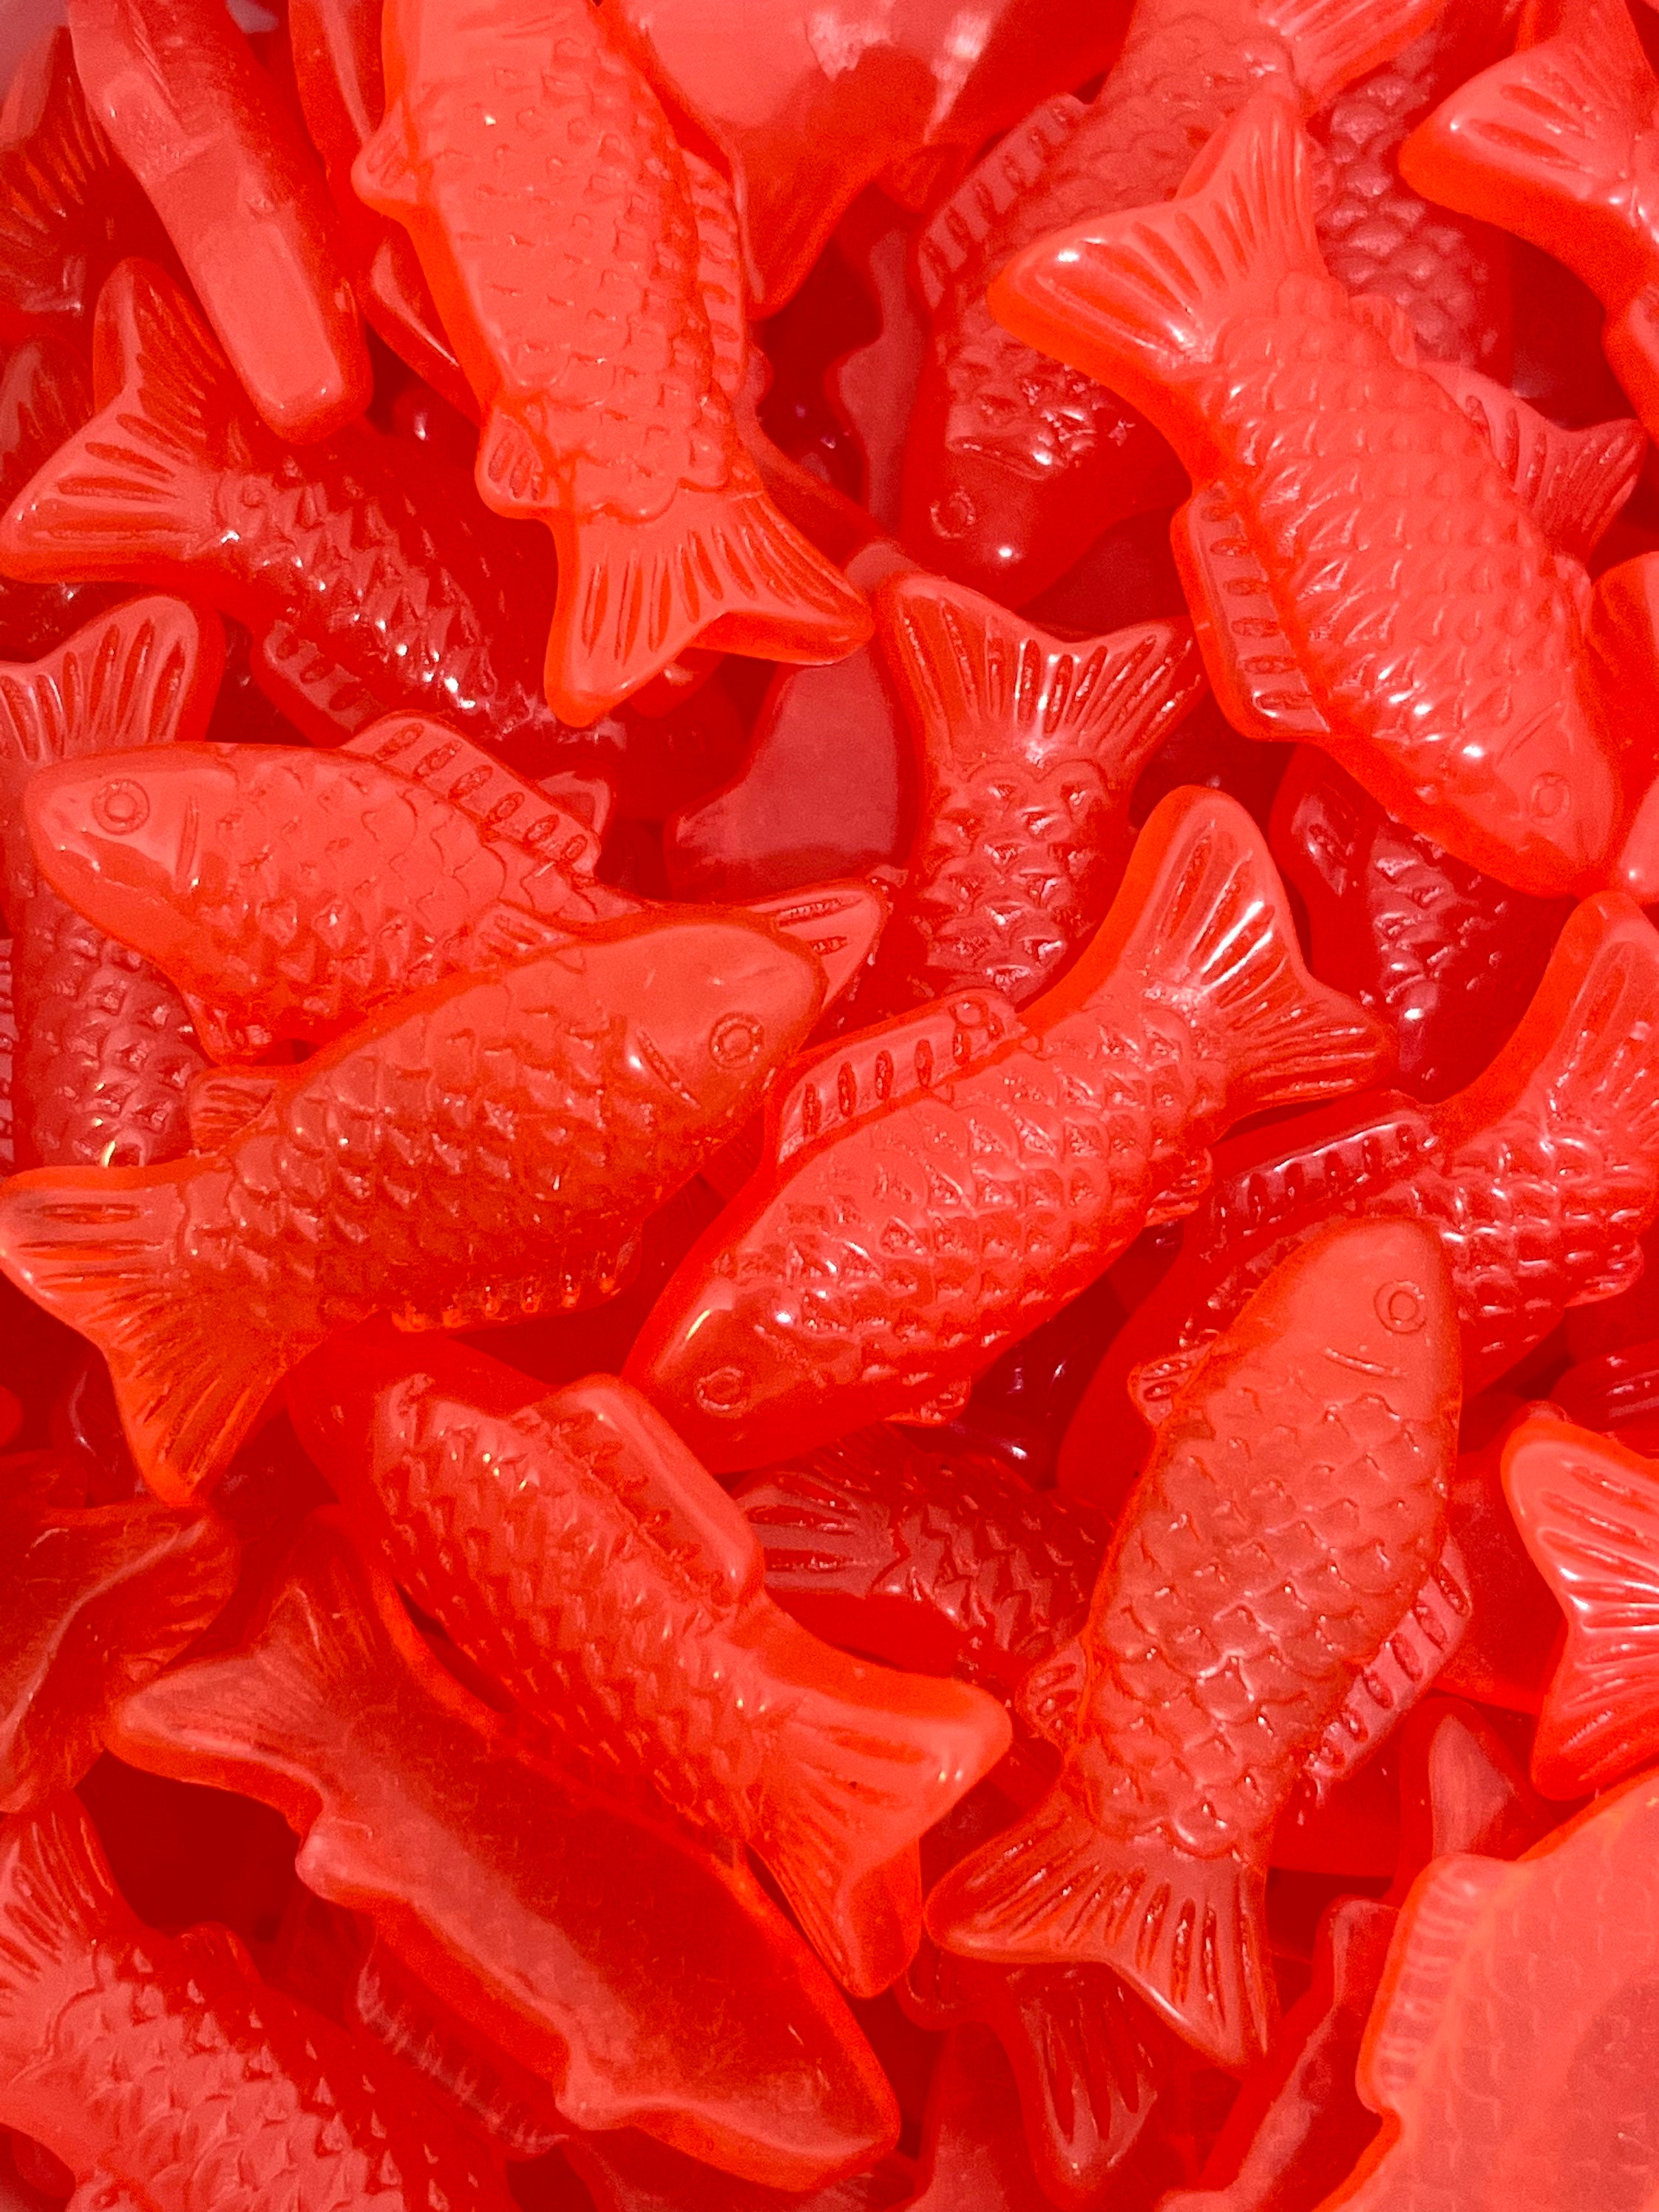 Yummy Looking Small Swedish Fish Fake Candies, Slime Topping, Fake